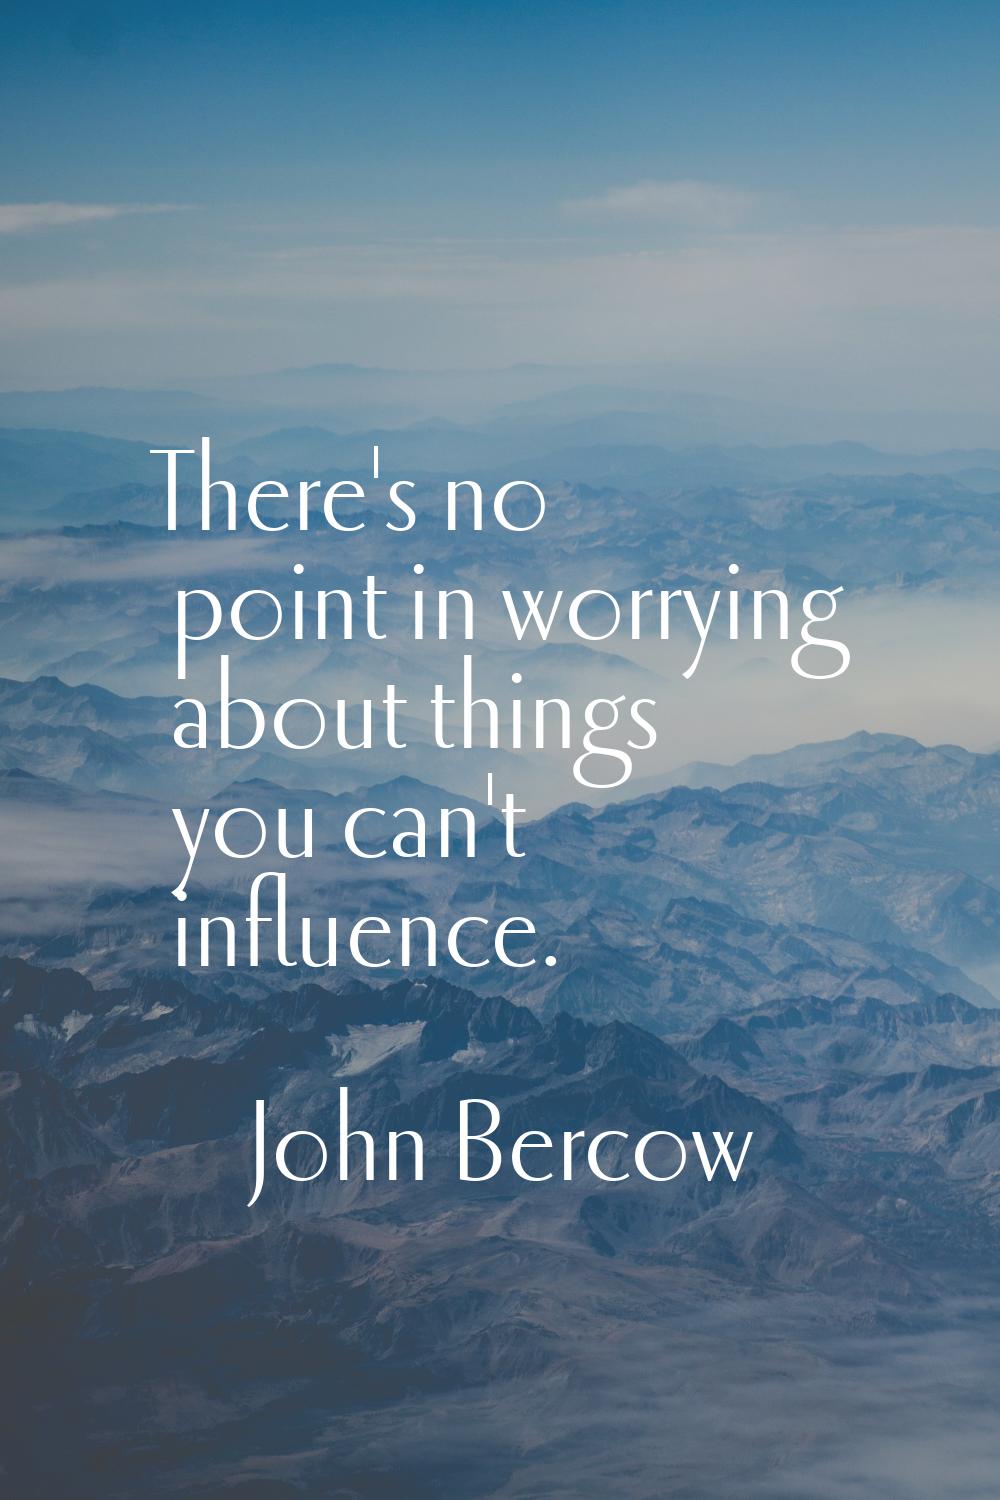 There's no point in worrying about things you can't influence.